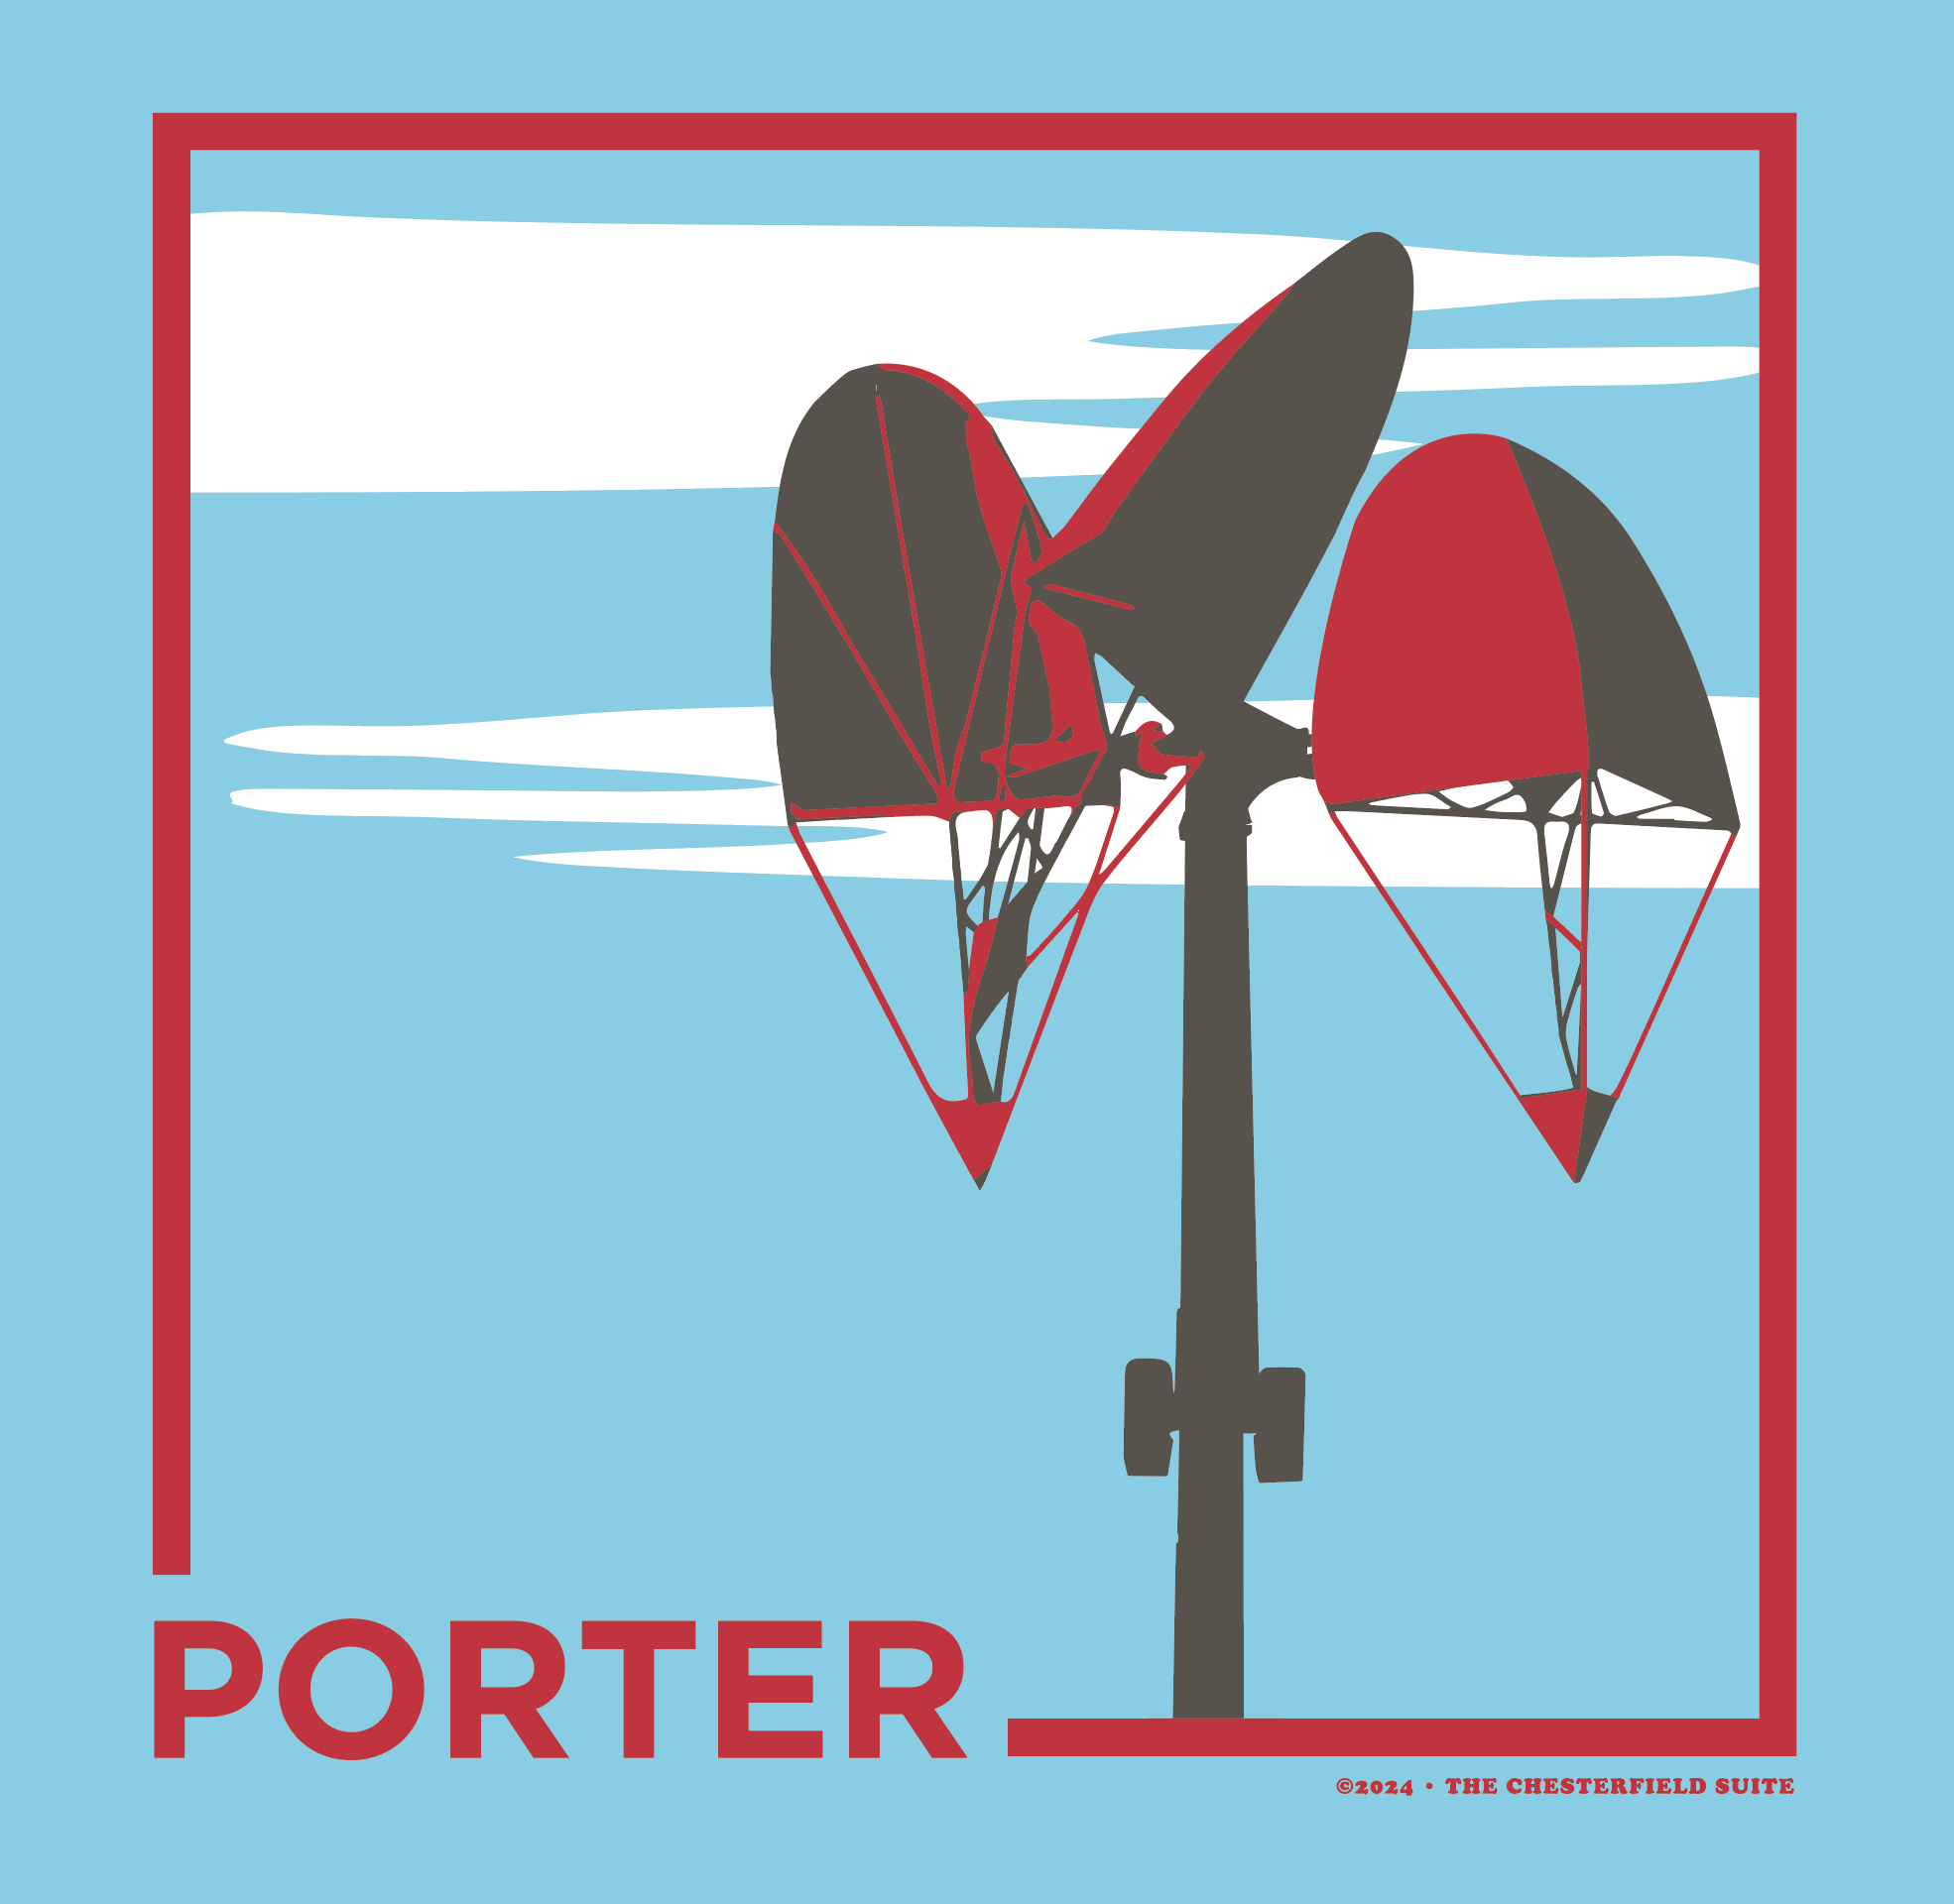 light blue design with the word porter and a square in red, featuring it's mobile and a white cloud